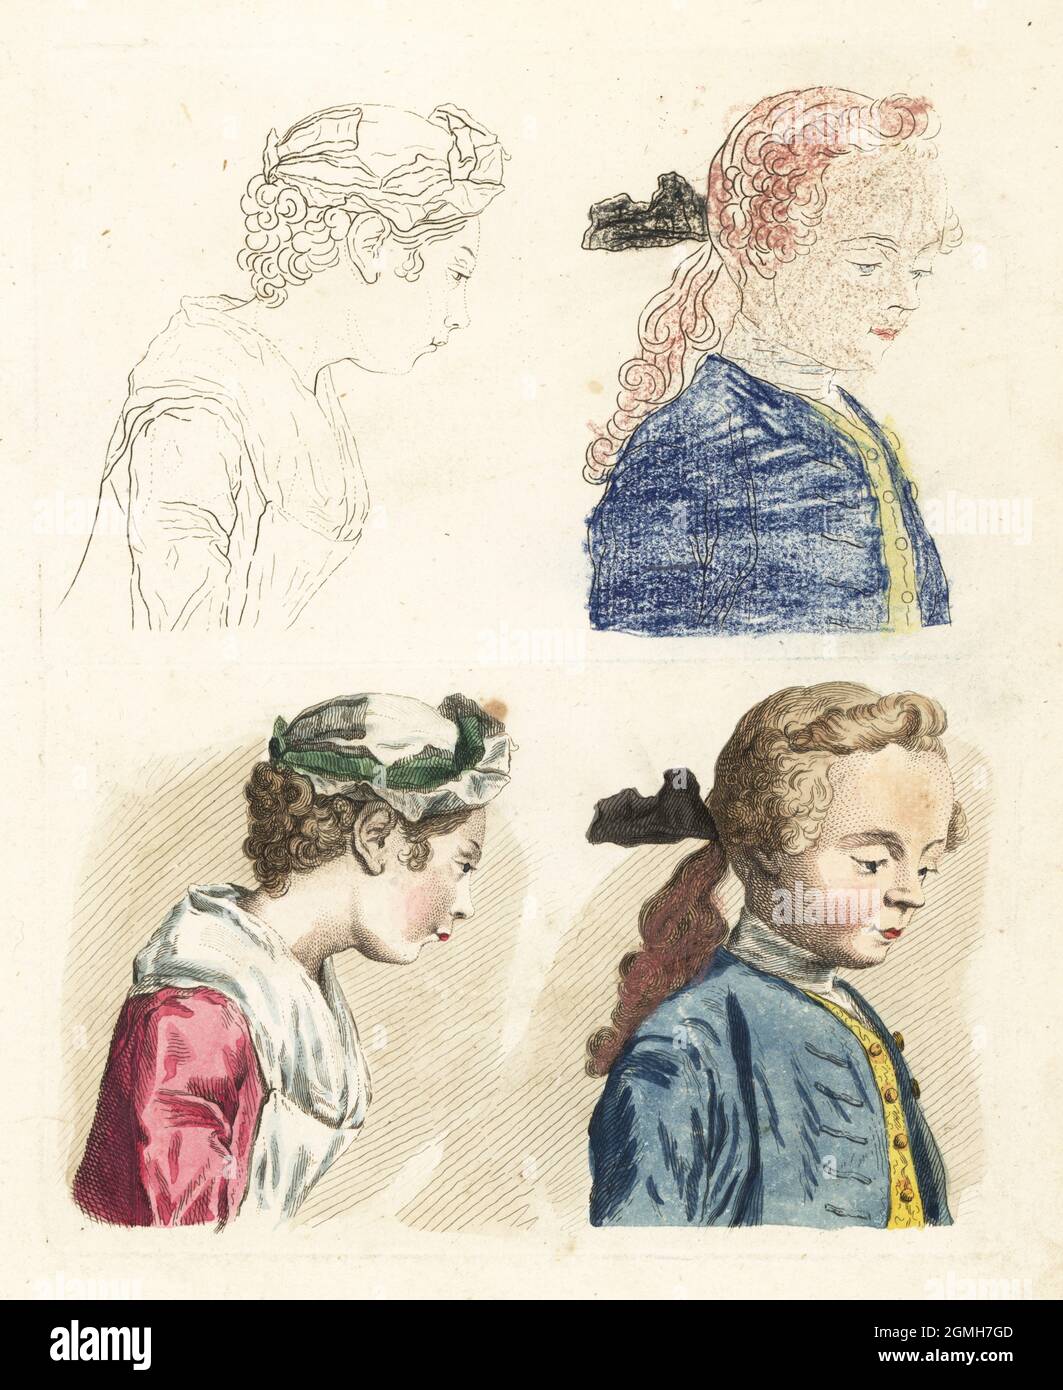 Figures from an 18th century colouring book. Professionally coloured examples and one amateurishly coloured in crayon. Handcoloured copperplate engraving from Robert Sayer’s The Artist’s Vade Mecum, Being the Whole Art of Drawing, London, 1766. Stock Photo